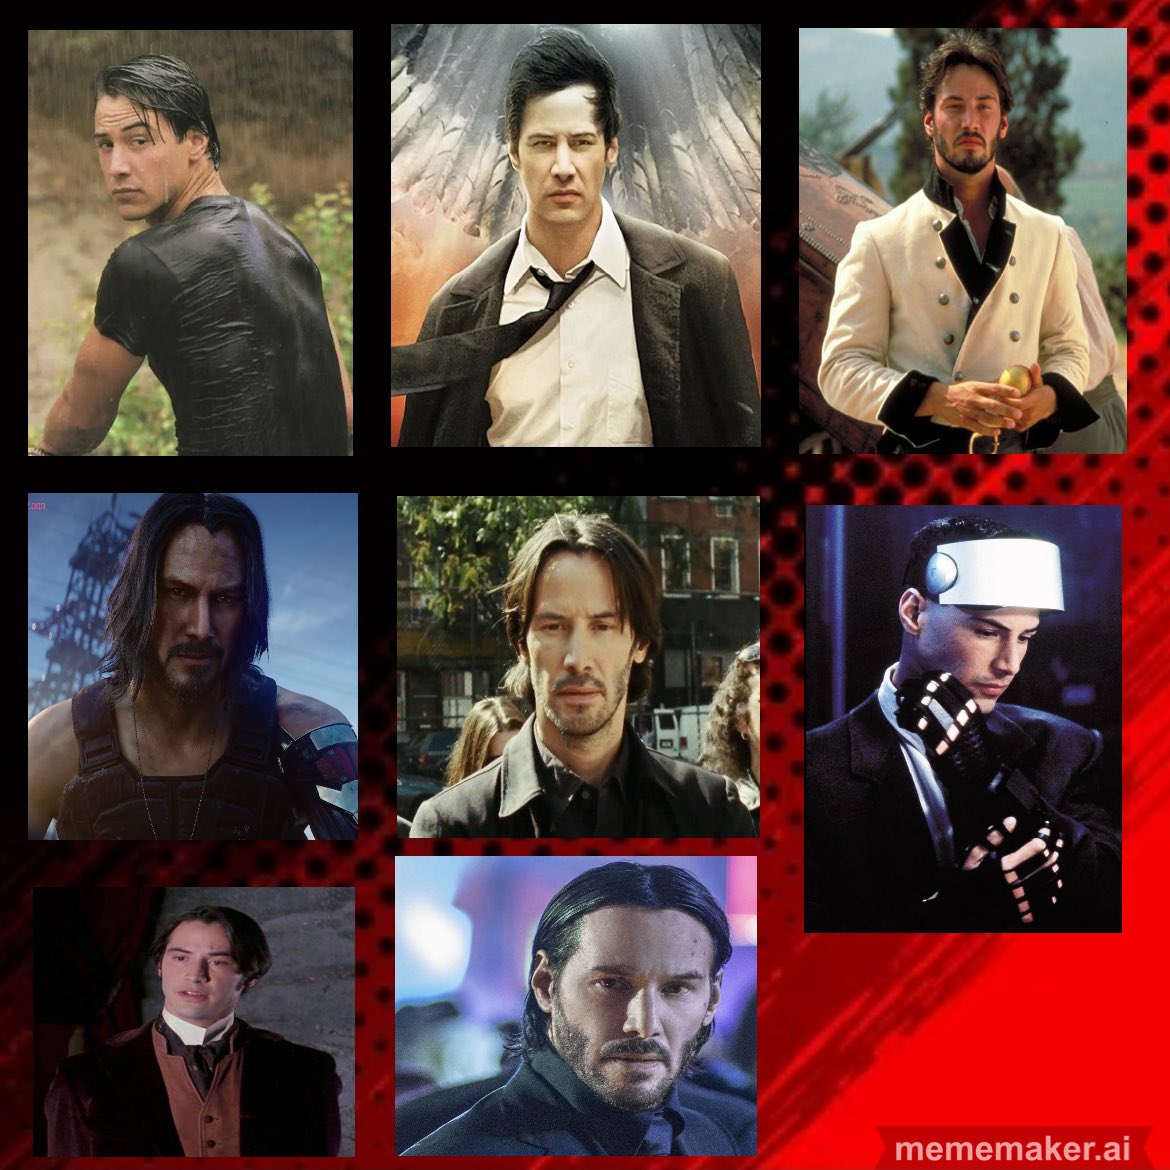 Can you name all these characters keanu reeves has played? Clue they start with the letter J! #KeanuReeves #hollywoodmovies #moviemayhem
#moviemadness #chooseone
#pickone #charactercreation